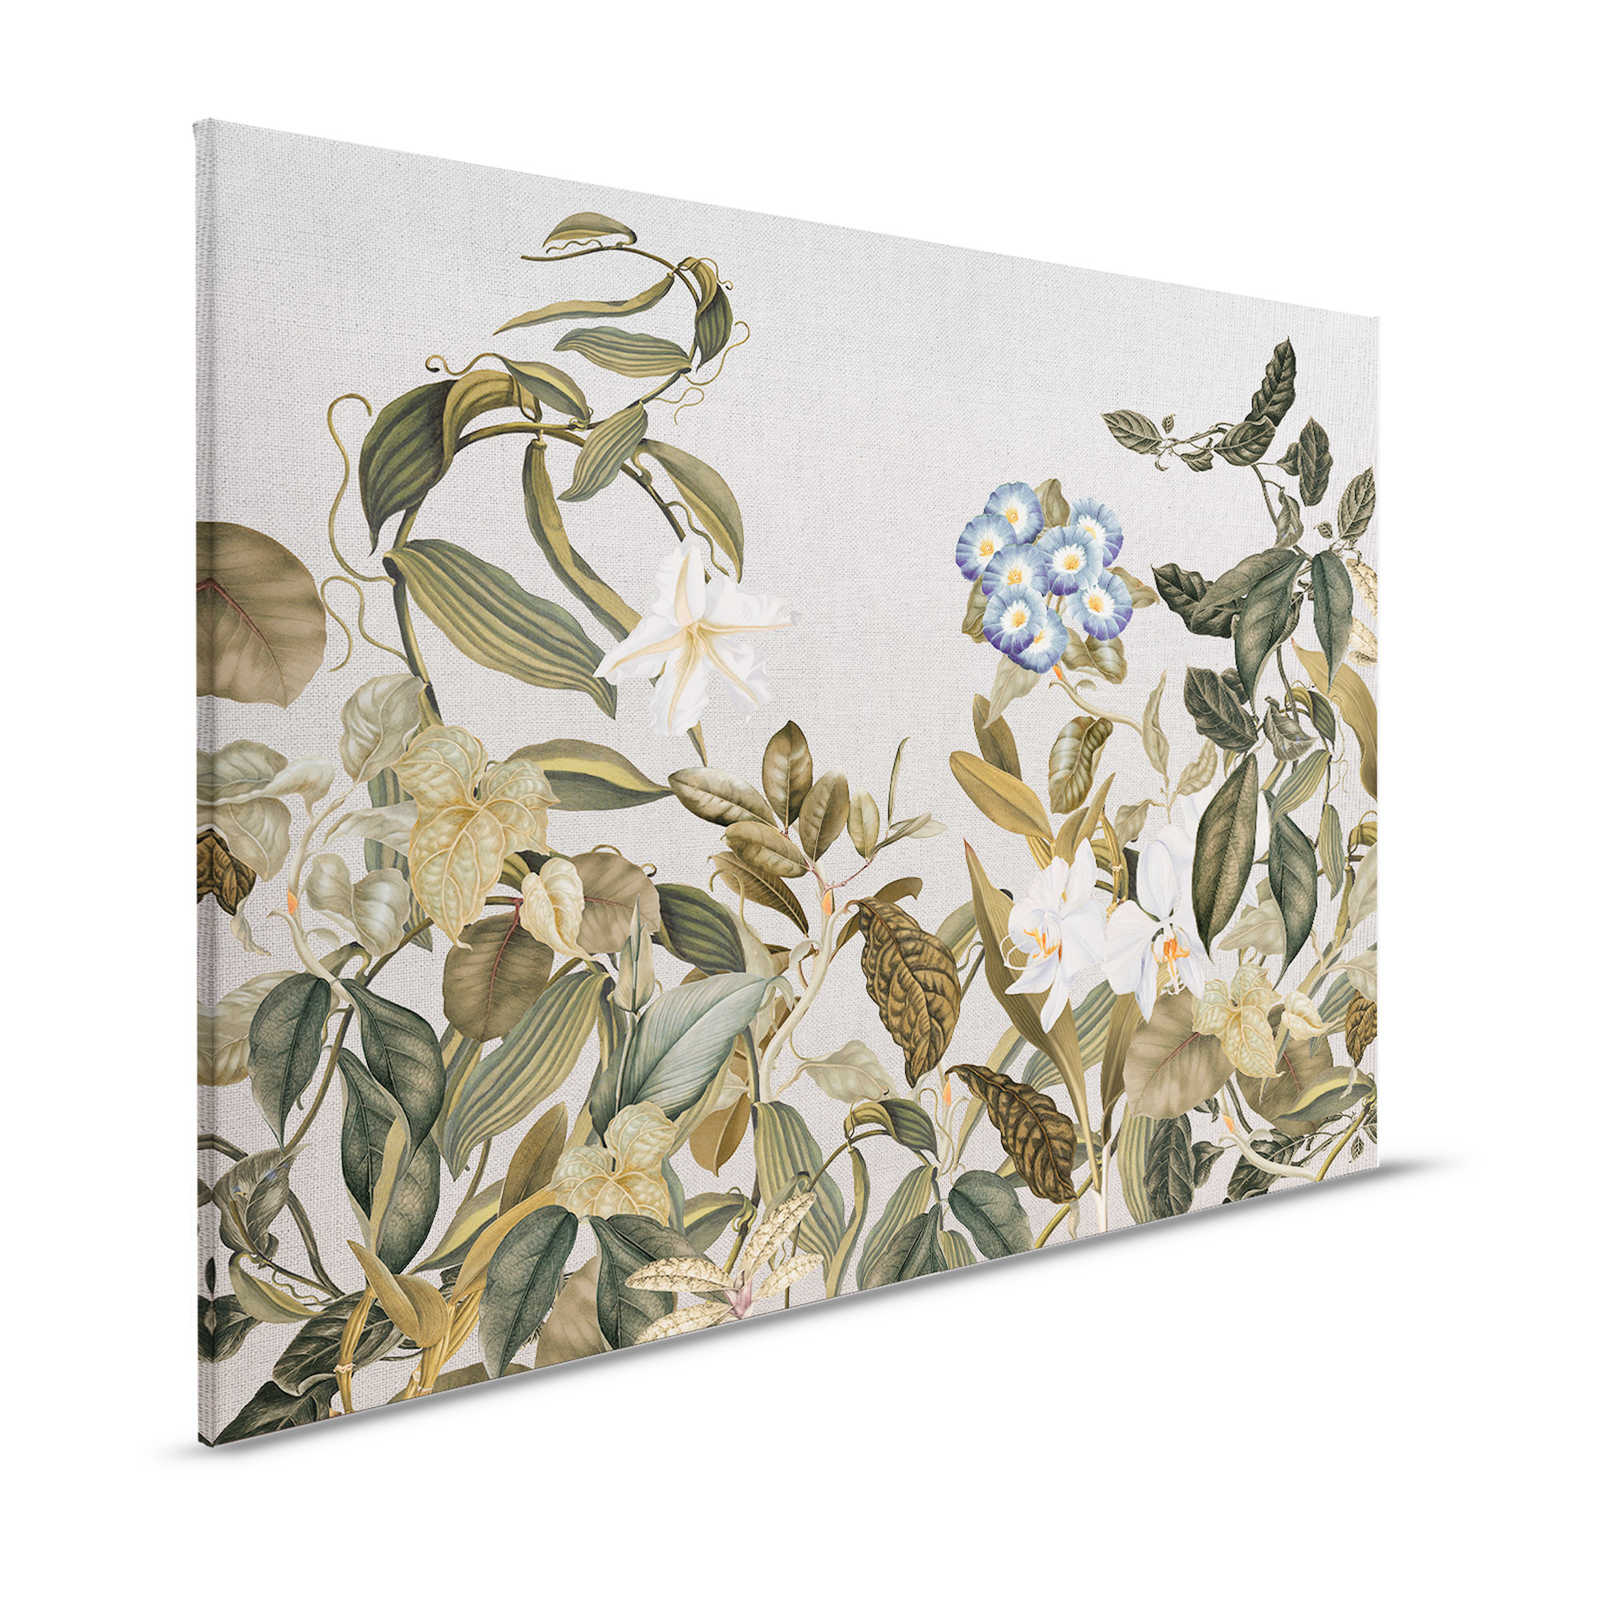 Canvas painting Botanical Style Flowers, Leaves & Textile Look - 1.20 m x 0.80 m
